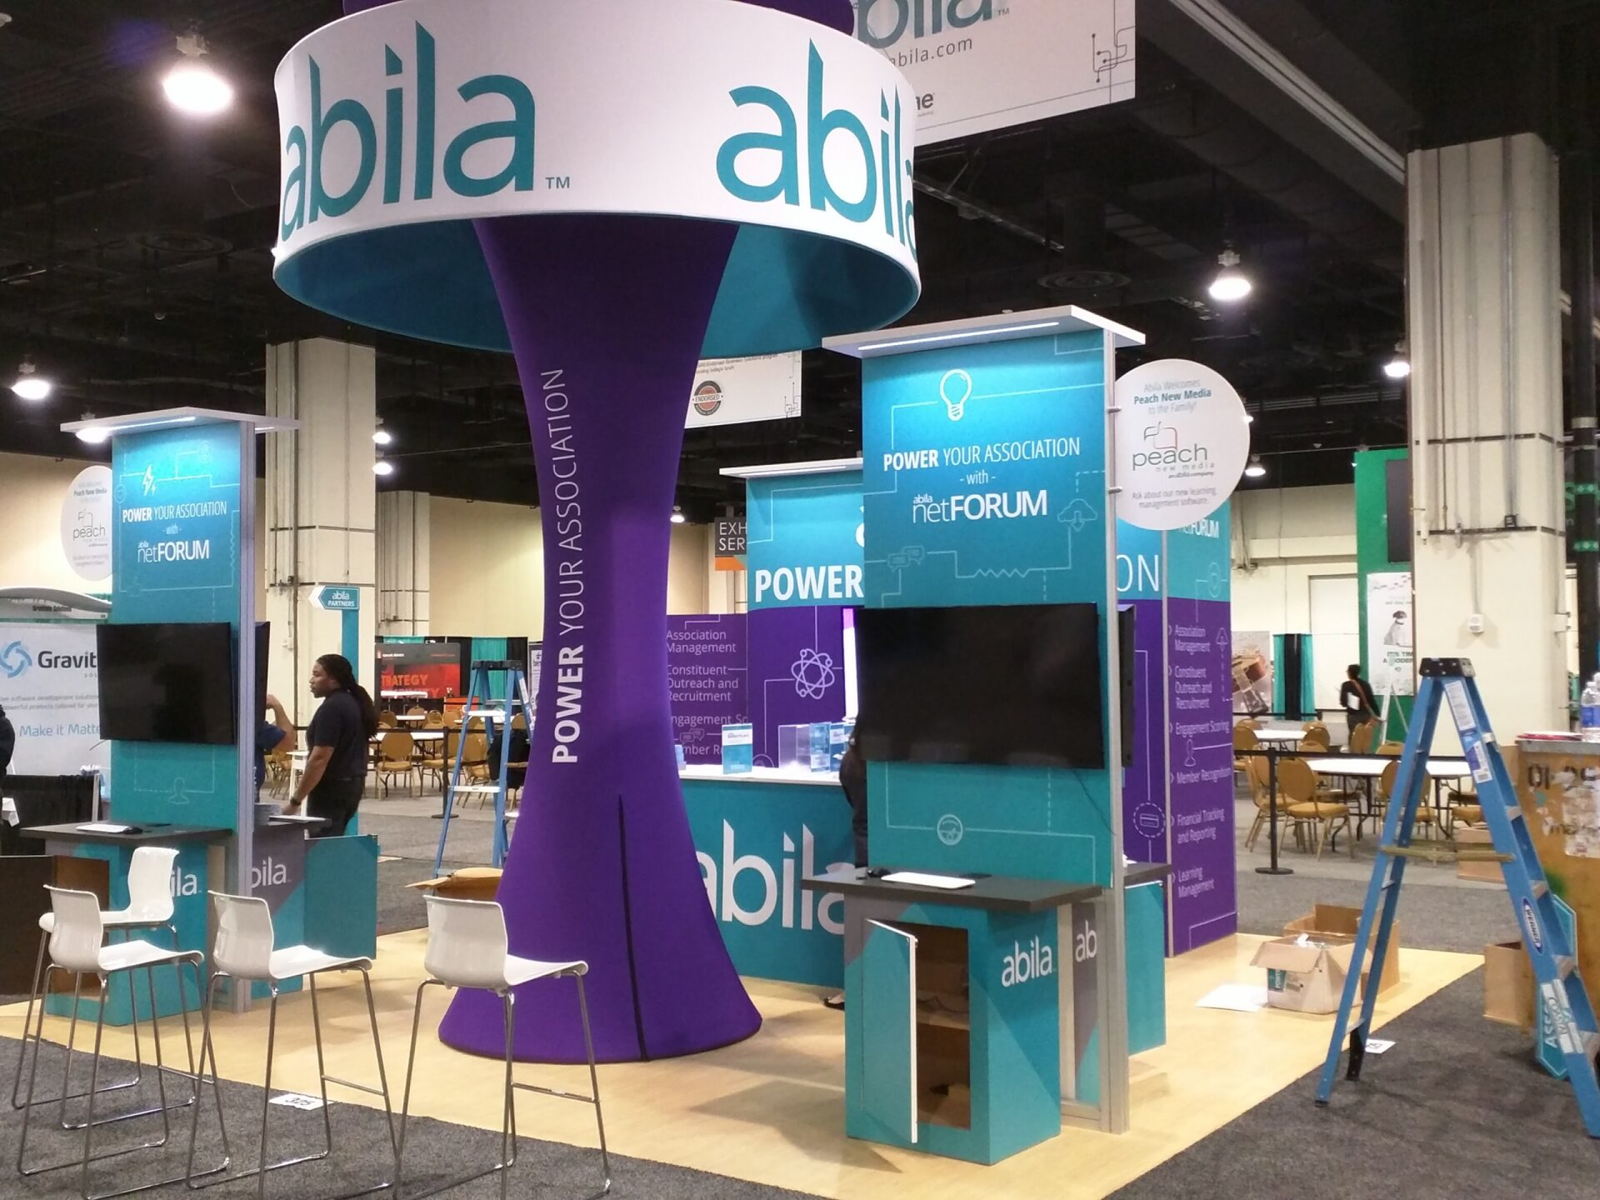 Abila 20x20 booth at a trade show under construction. Ladders and crates are in the photo. Large purple fabric funnel tower at the center of the display.